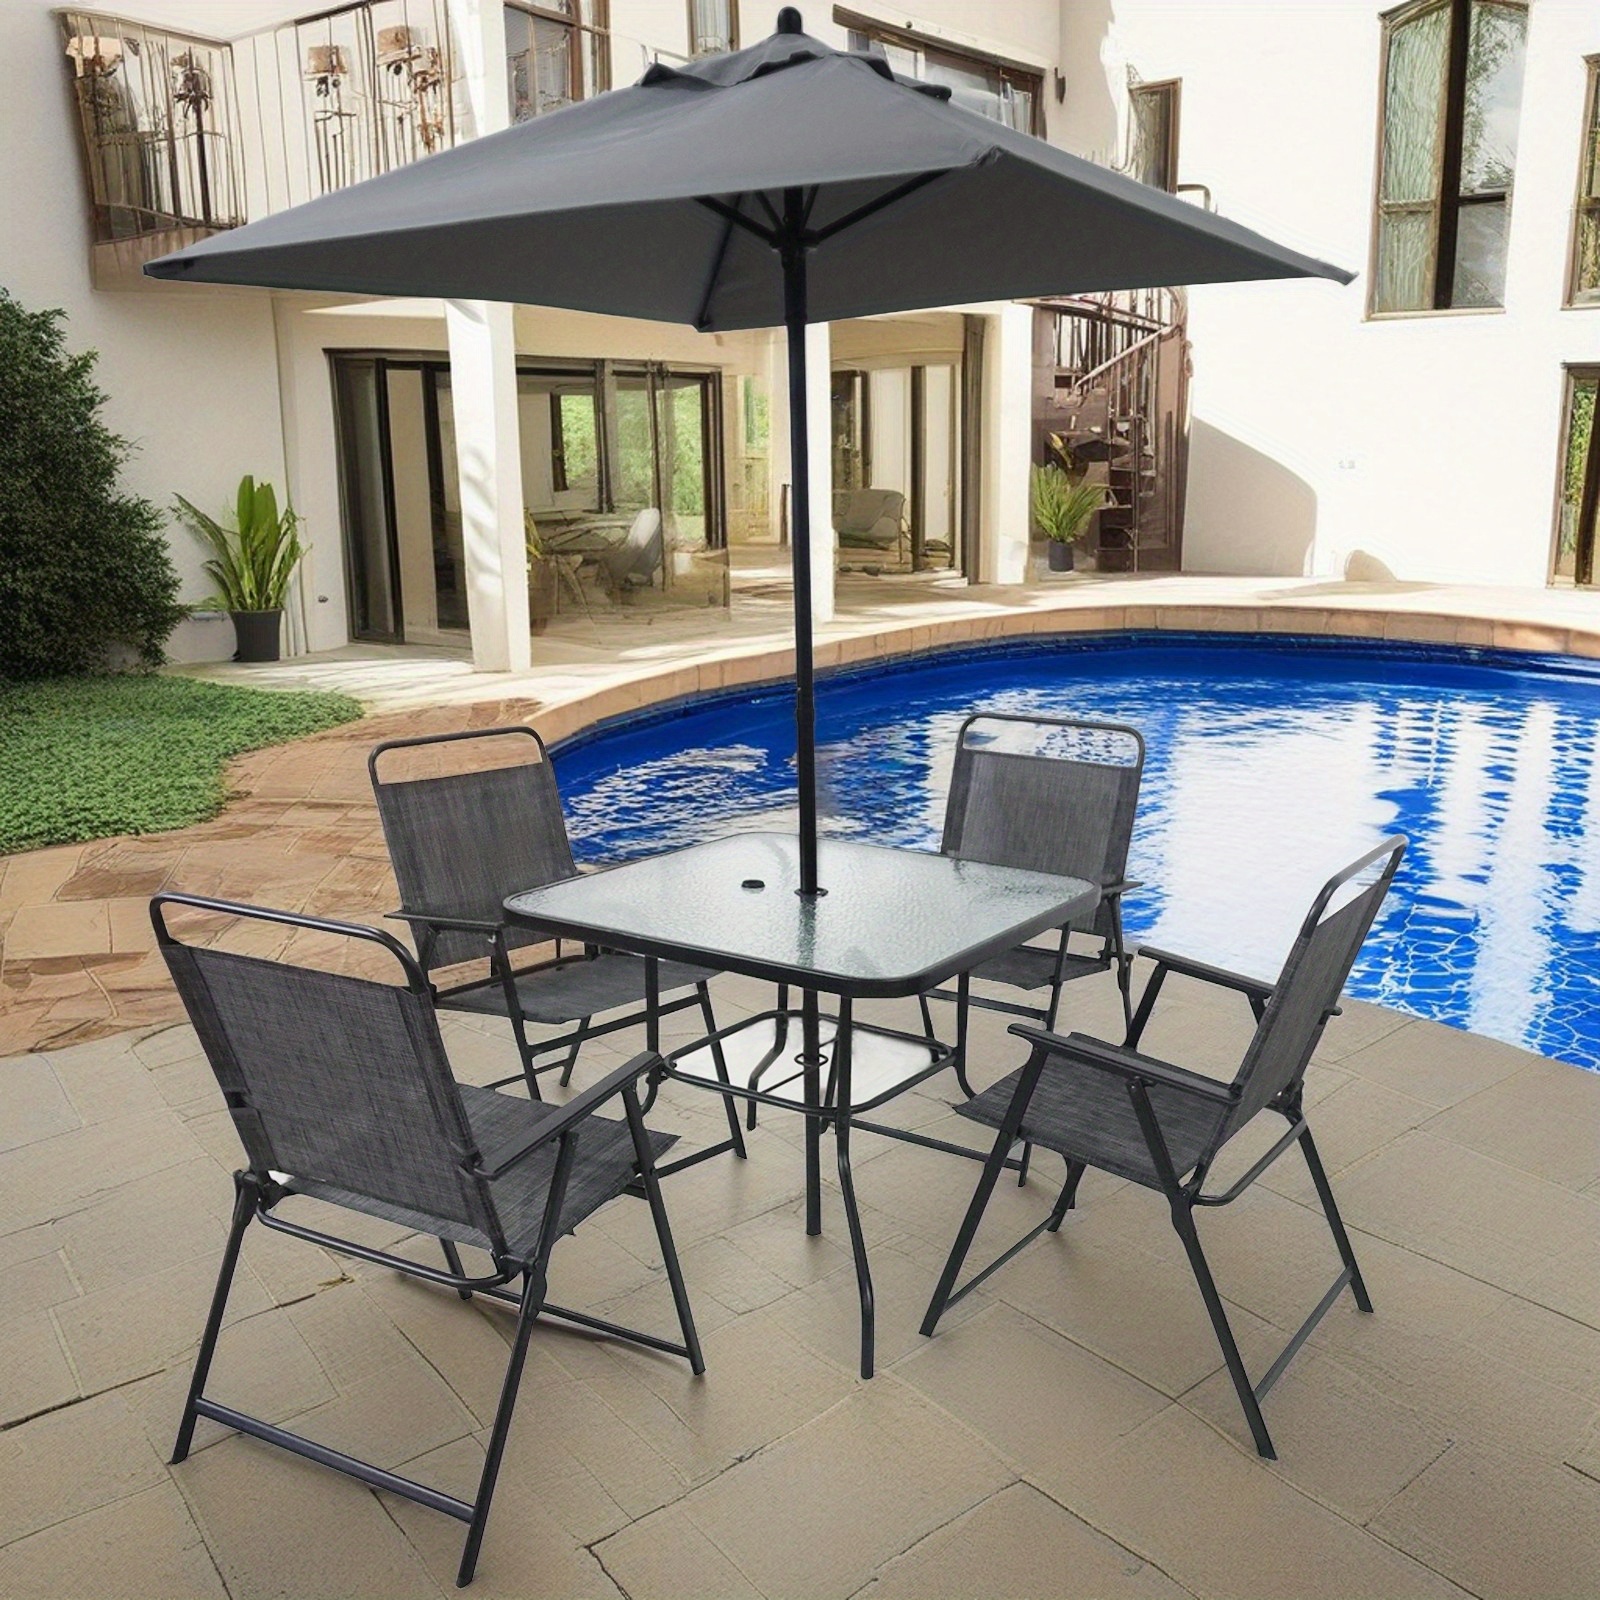 

Outdoor Patio Dining Set For 4 People, Metal Patio Furniture Table And Chair Set With Umbrella, Black